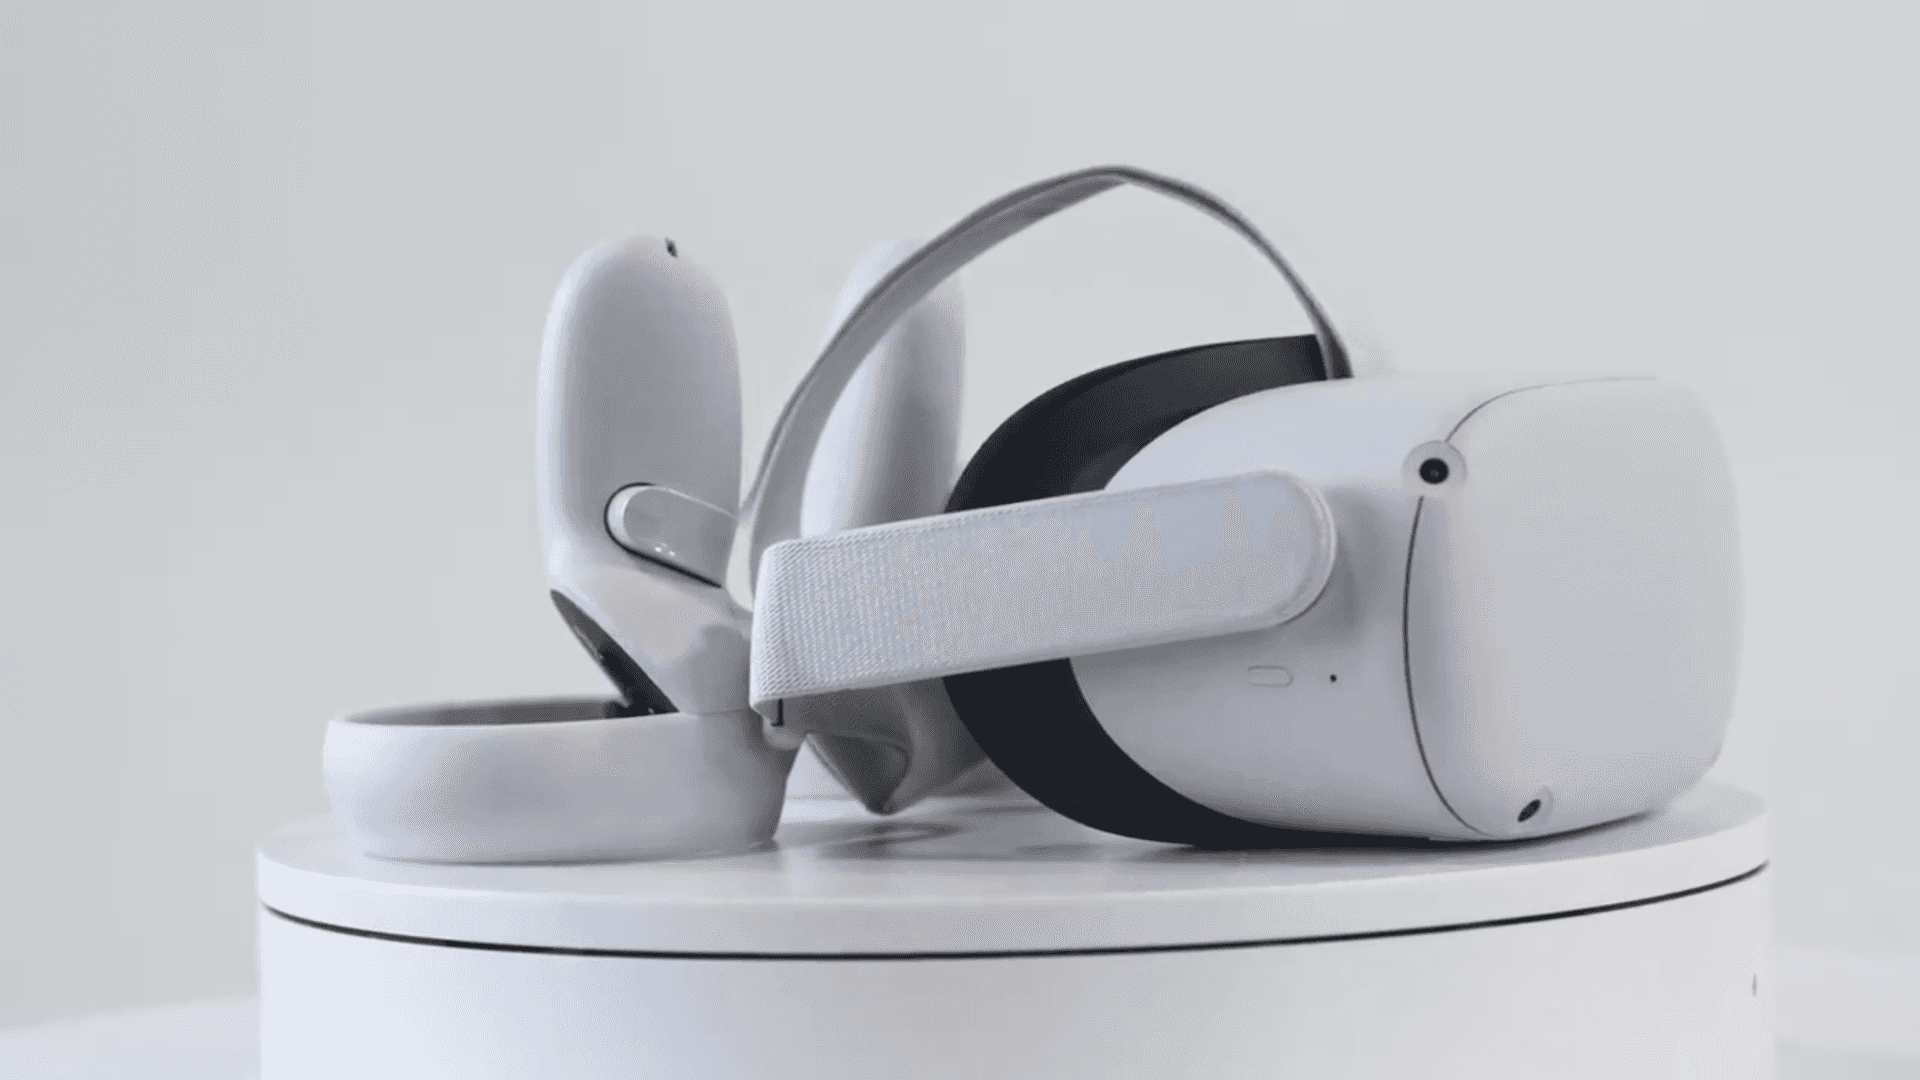 A White Headset With A Headset On Top